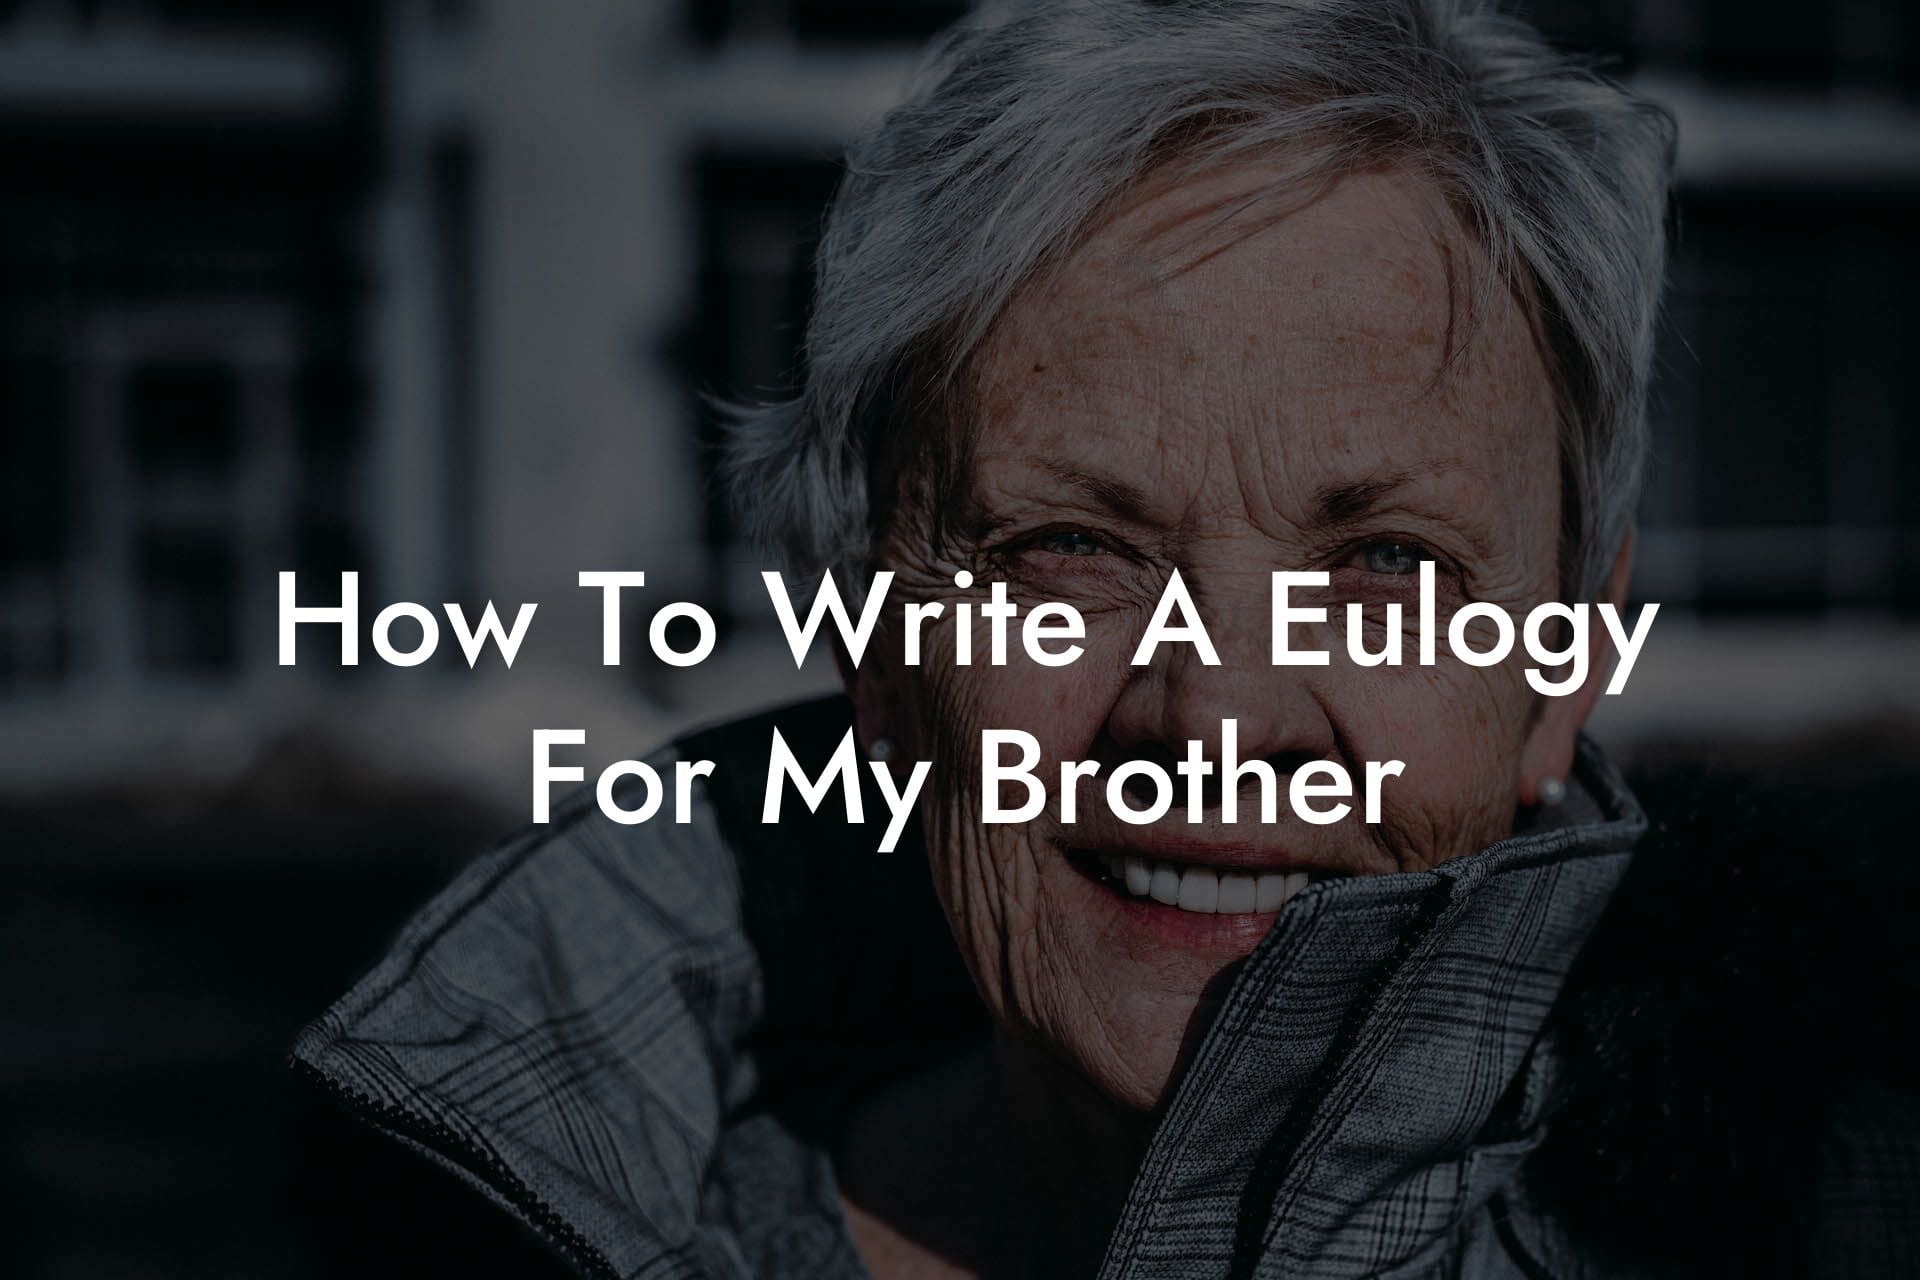 How To Write A Eulogy For My Brother